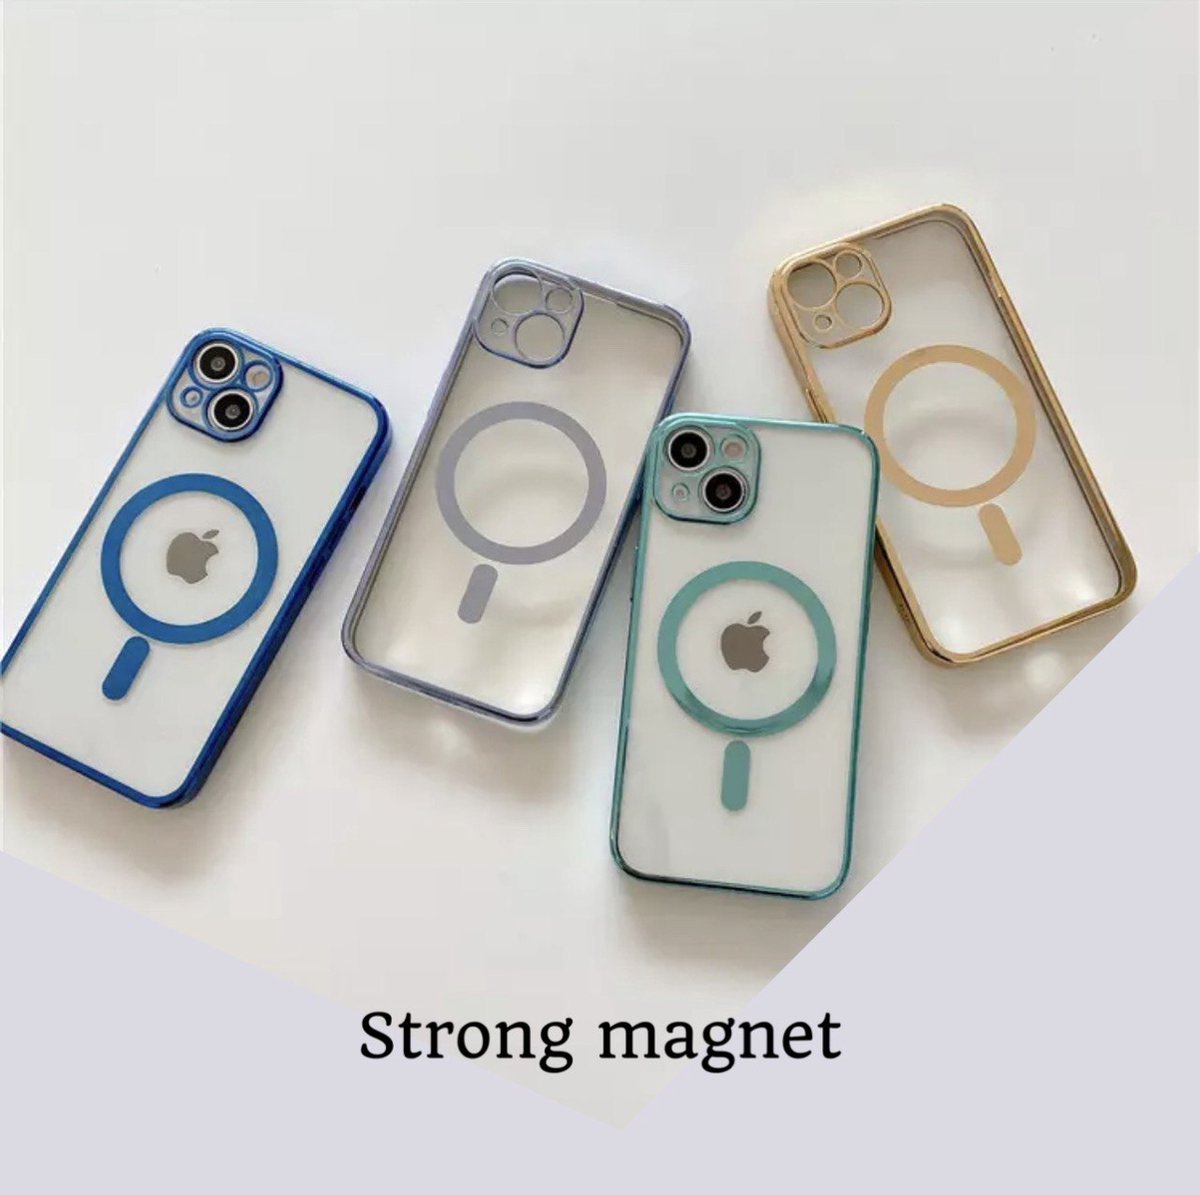 iPhone 11 Pro Max Magnetische Hoesje Transparant-Zilver - Magnetisch Hoesje met Ring iPhone 11 Pro Max - iPhone 11 Pro Max Magneet Case